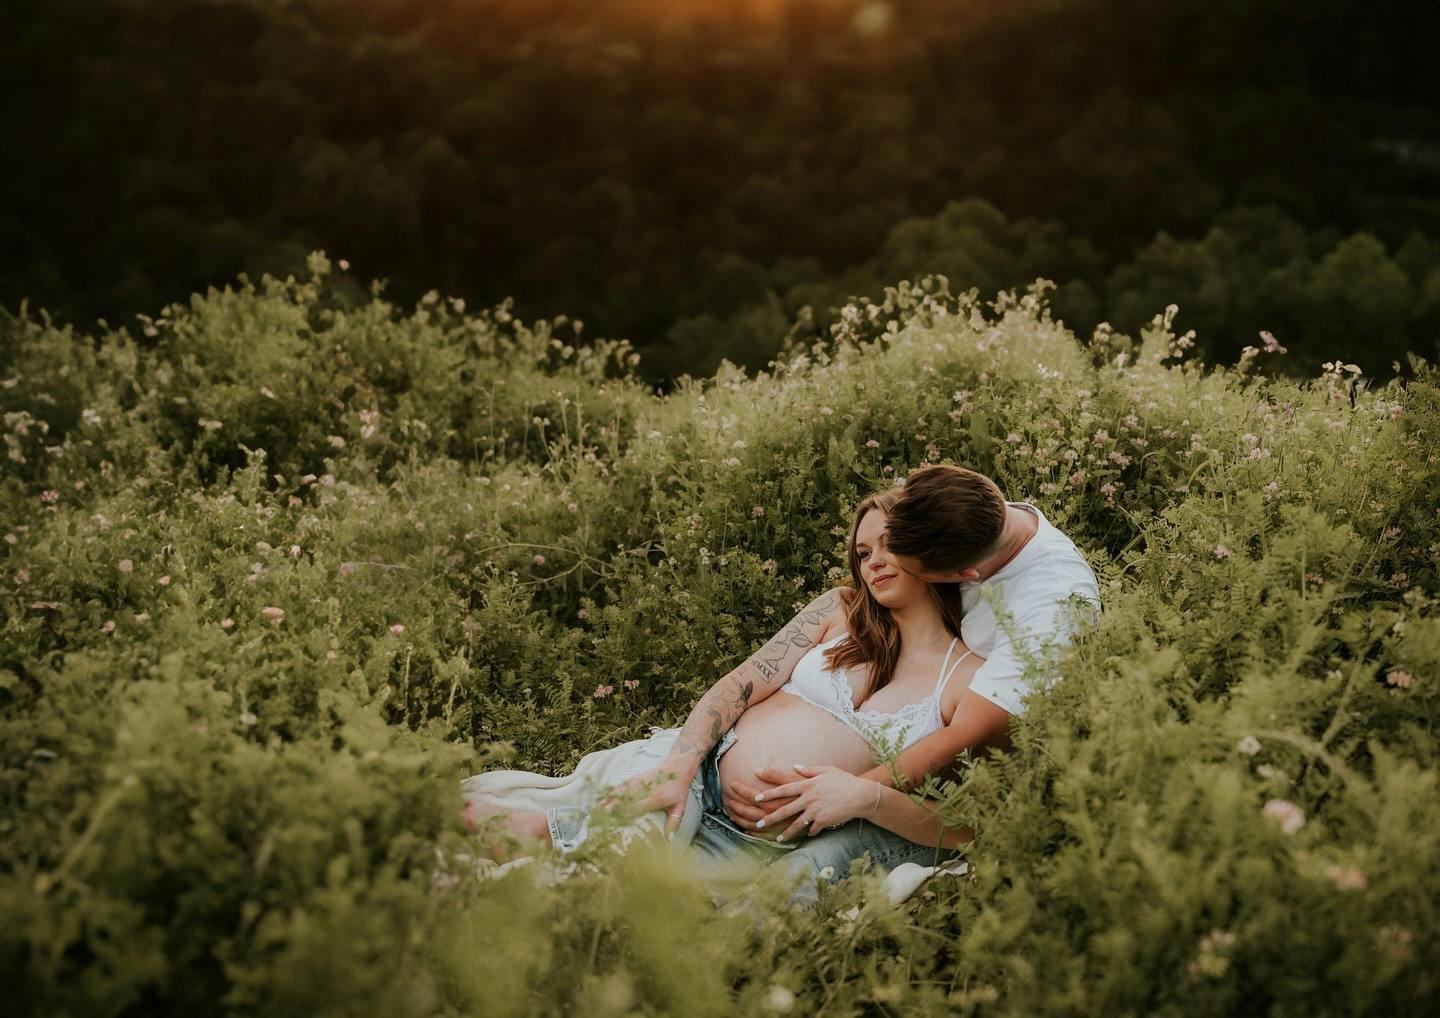 📖 The moment you find out you’re bringing a new life into the world, everything changes 🌸…

Being pregnant with your first child is like embarking on the most incredible journey you could ever imagine. Every flutter and kick, every new craving and emotion, reminds you that life is growing inside you, a beautiful testament to love and new beginnings.

During this maternity session the emotions were palpable. The joy, the anticipation, the love that radiated from the parents-to-be was something truly special. 

Life is about to change in the most wonderful ways, and these photos are a celebration of that transformation.

Think about those quiet moments when you’re alone, feeling the baby move, dreaming about their future. The sleepless nights, the endless questions, and the overwhelming love that fills your heart. It’s these moments that make up the beautiful chaos of becoming a parent.

As I look through these photos, I see not just a glowing mom-to-be, but a family on the cusp of their greatest adventure. Each image is a reminder that life’s greatest joys often come from the smallest beginnings.

Do you remember the moment you found out you were expecting? Or perhaps the day you felt that first kick? 

Share your beautiful memories and let’s celebrate the journey of motherhood together. 💬👇

Would you like more details or to schedule a maternity photo session? Contact me today and let’s capture the beauty of your journey to motherhood. 📸💕
.
.
.
.
.
.
.
#TwinCitiesMaternity #MinnesotaPhotography #PregnancyJourney #FirstChild #MaternityMoments #FamilyLove #ExpectingMoms #MotherhoodMagic #LifeChangingMoments #TwinCitiesPhotographer #MinnesotaMaternityPhotos #TwinCitiesExpecting #MinnesotaMoms #TwinCitiesFamilyPhotos #stpaulphotographer  #TwinCitiesMaternity #MinnesotaPhotography #ExpectingMoms #MotherhoodMagic #LifeChangingMoments #TwinCitiesPhotographer